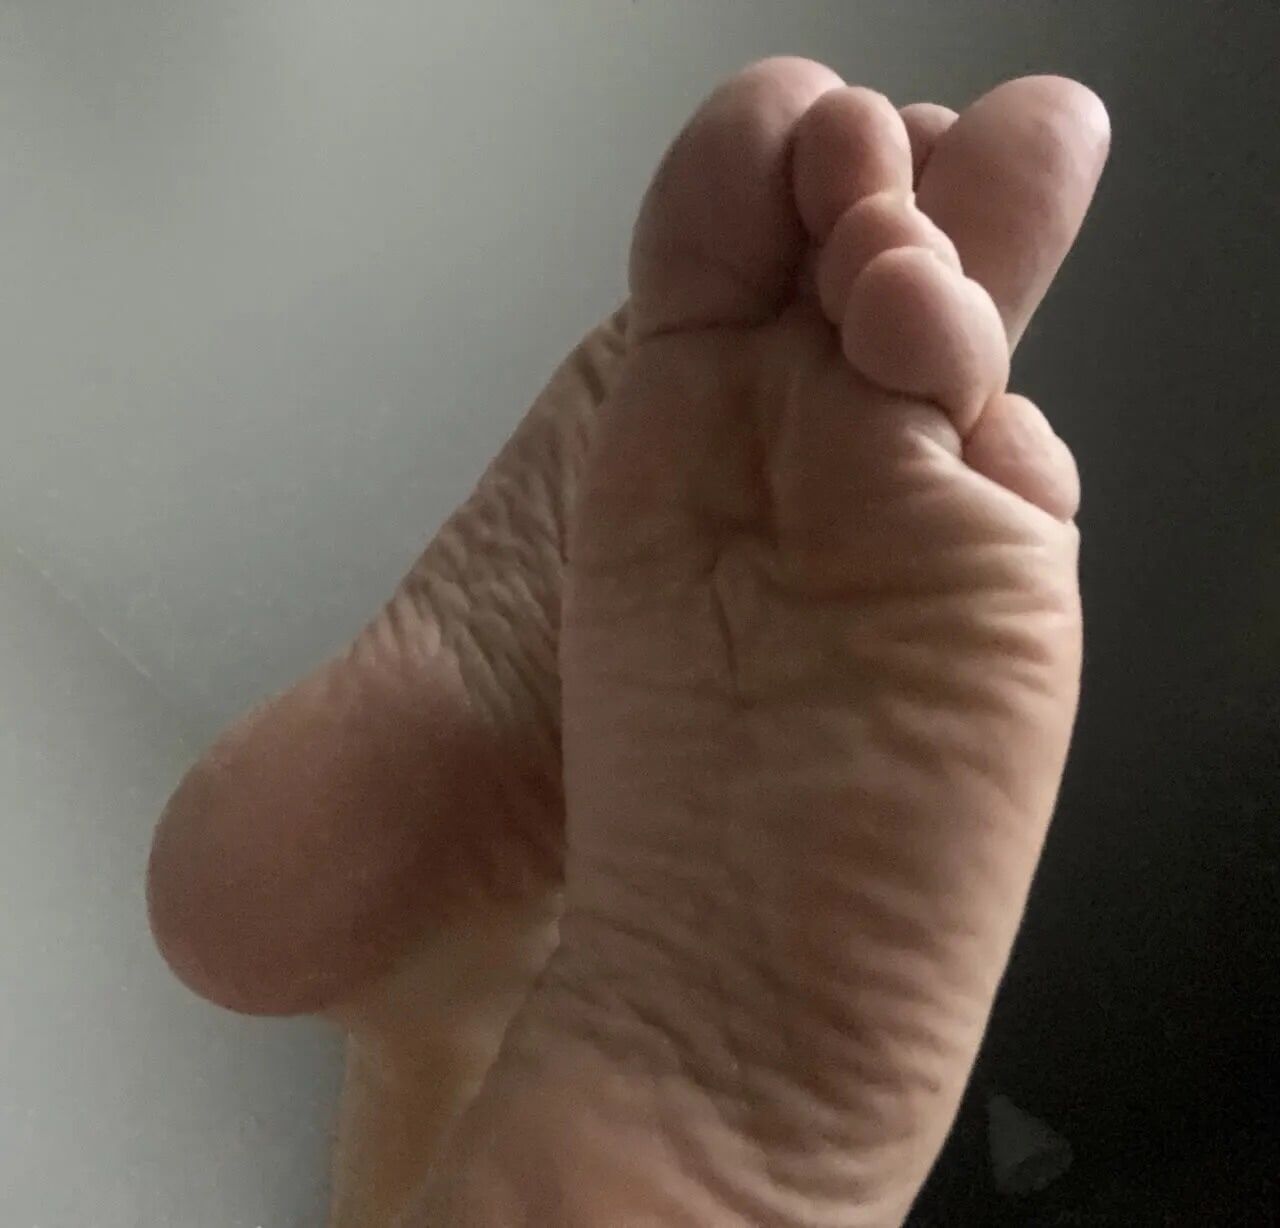 My cock and feet #9